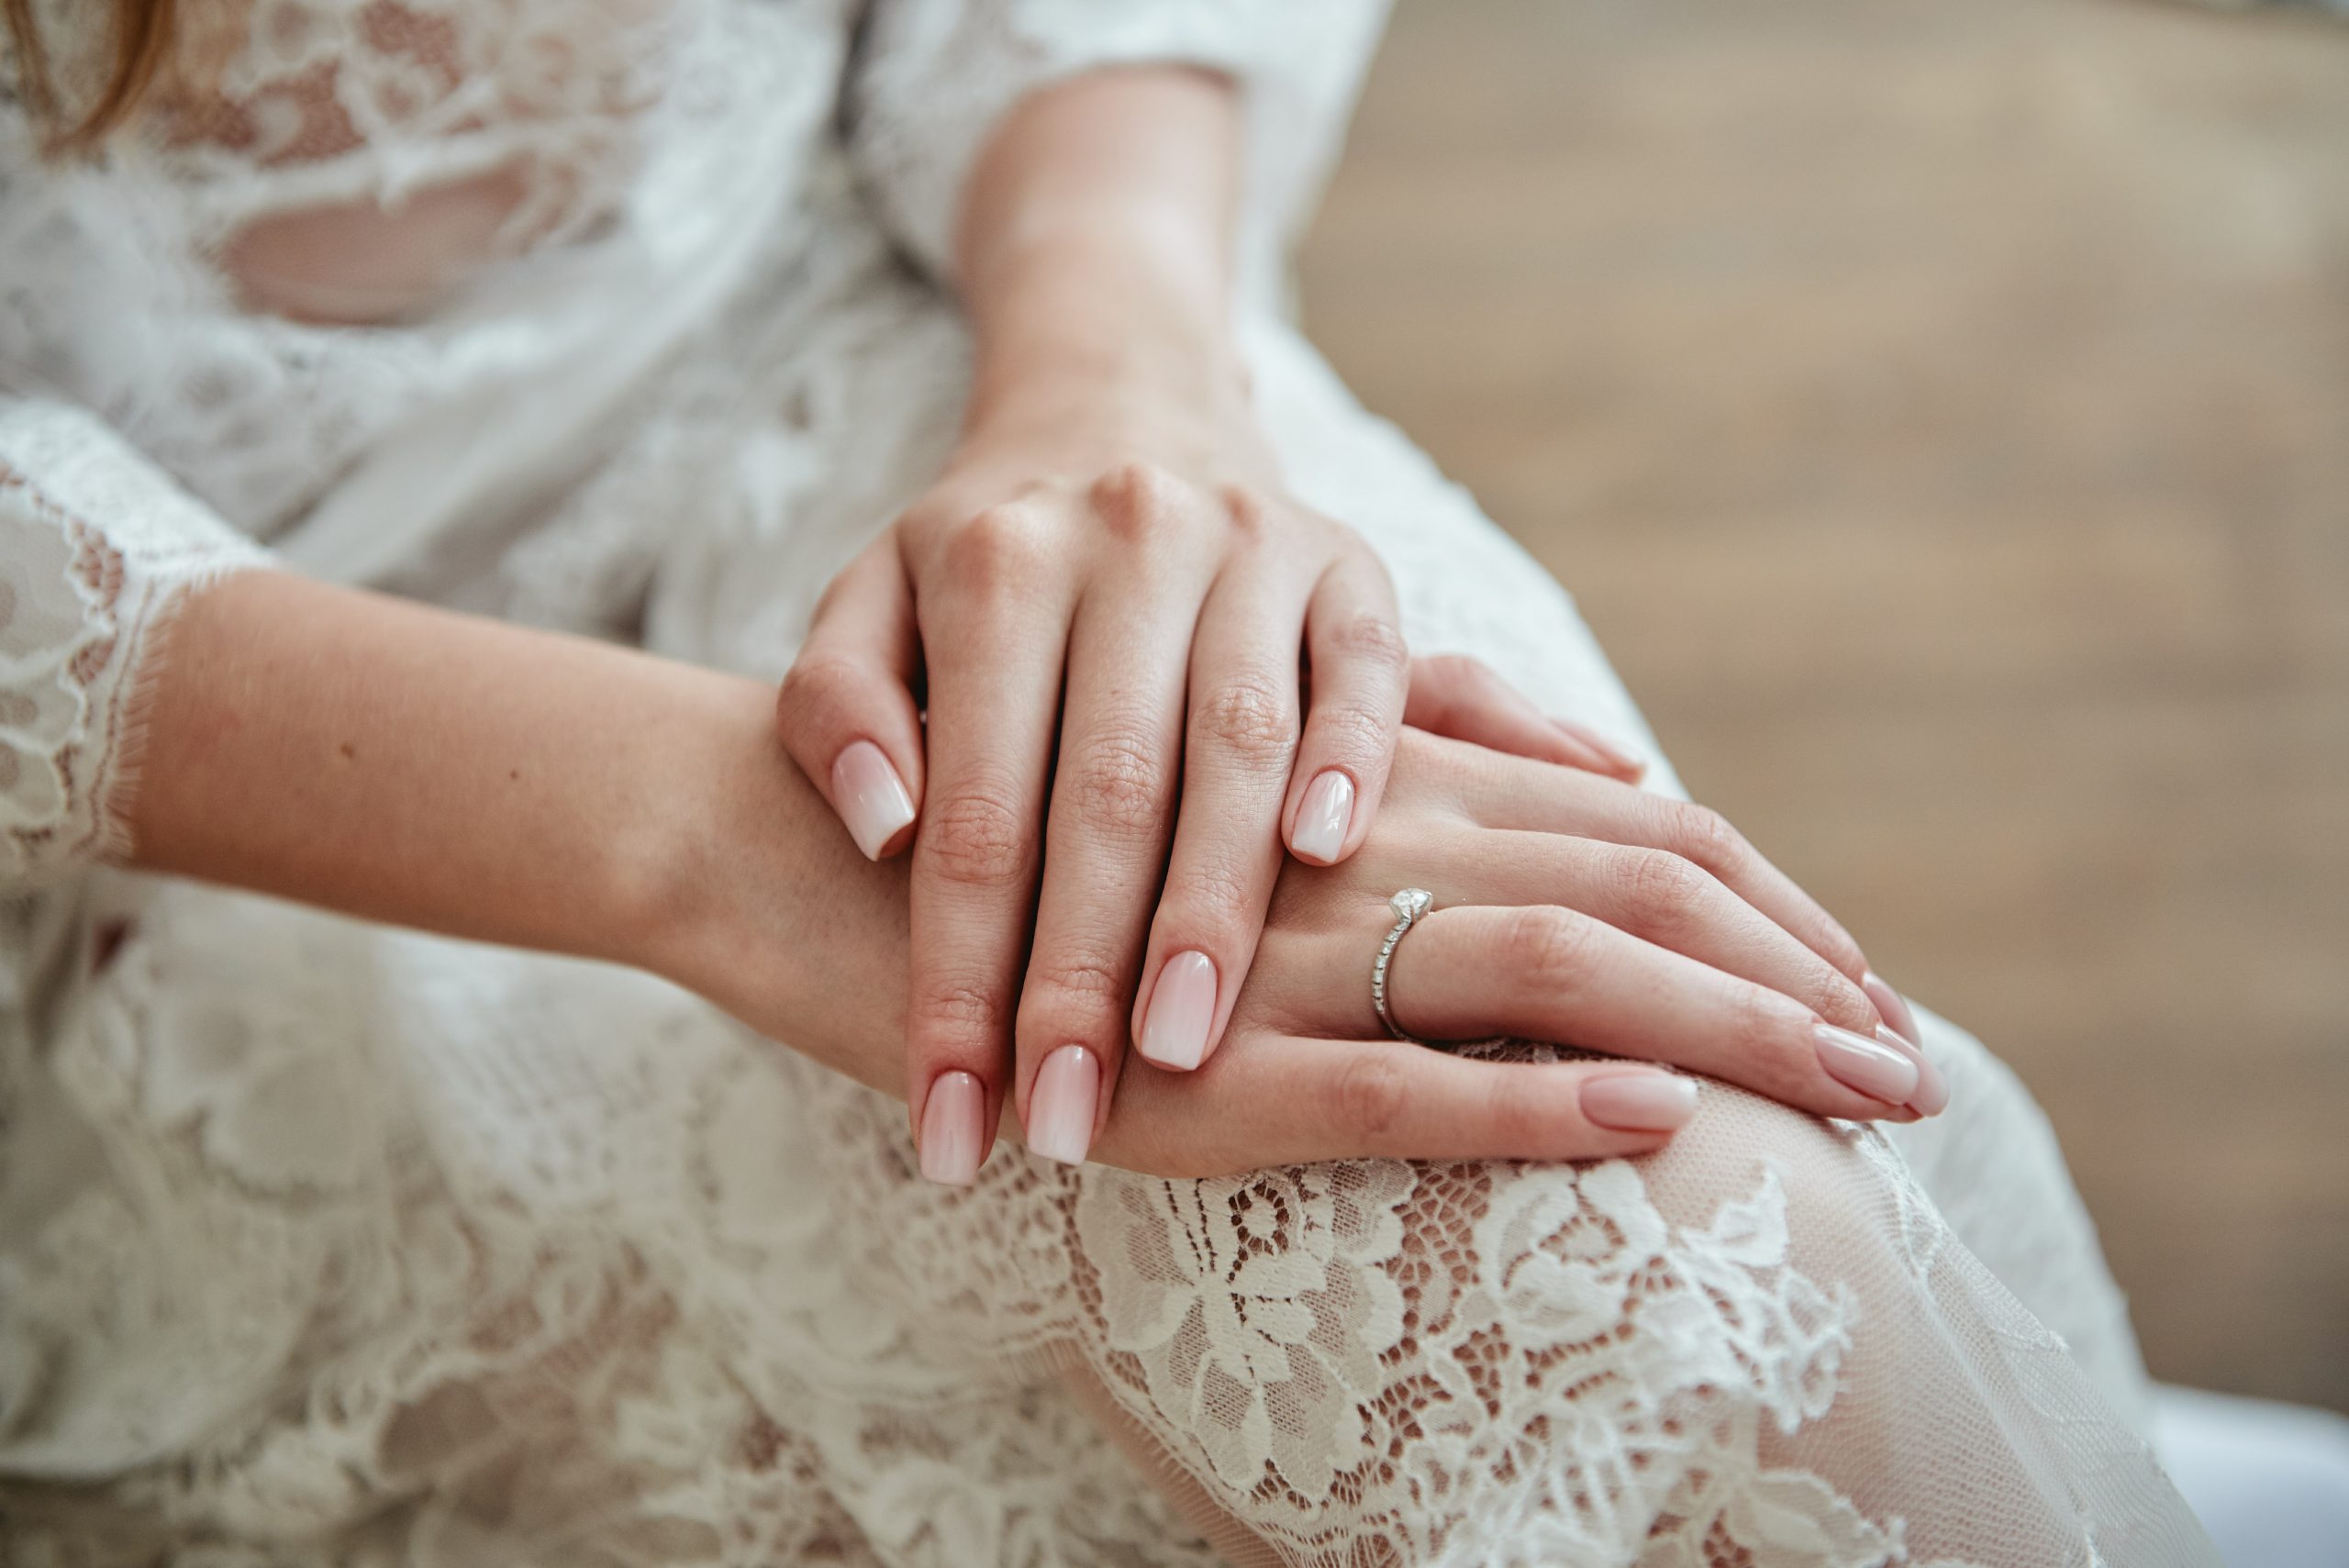 Wedding nails – how to style them?